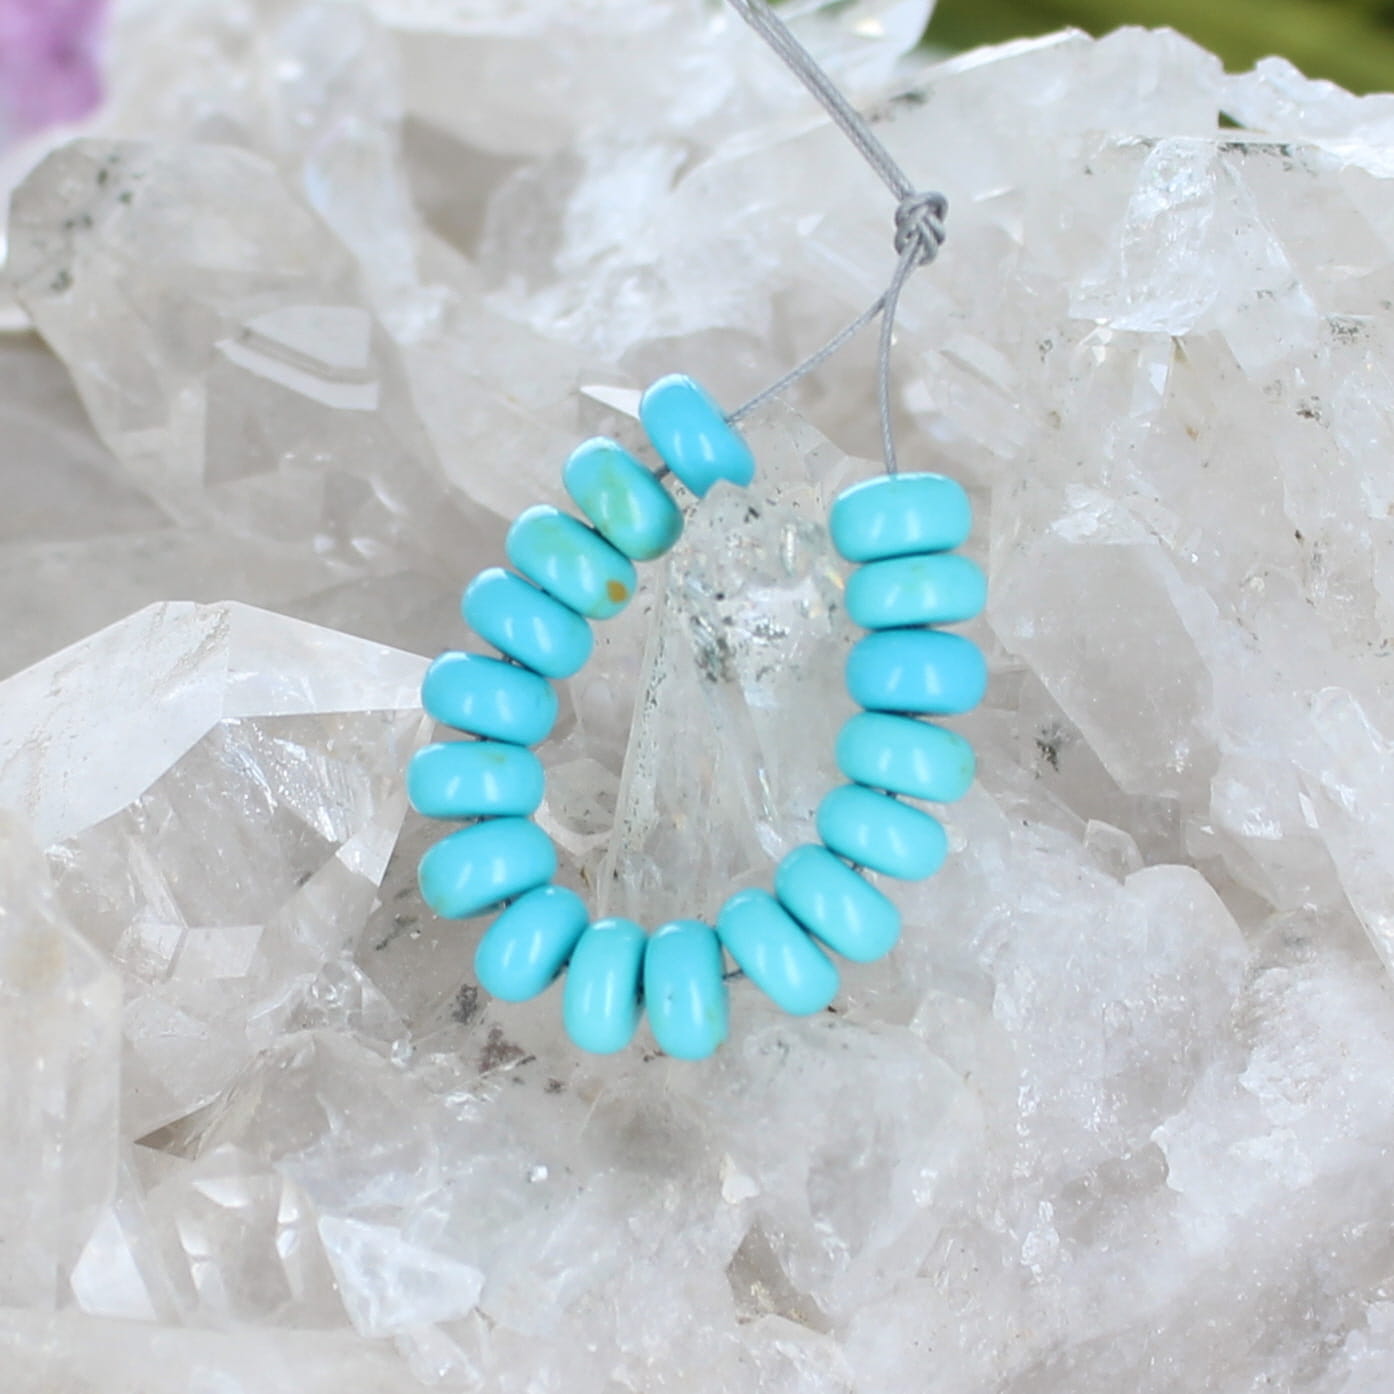 AAA Campitos {Mexican} Aqua Blue Beads Rondelles 6mm 17 Beads